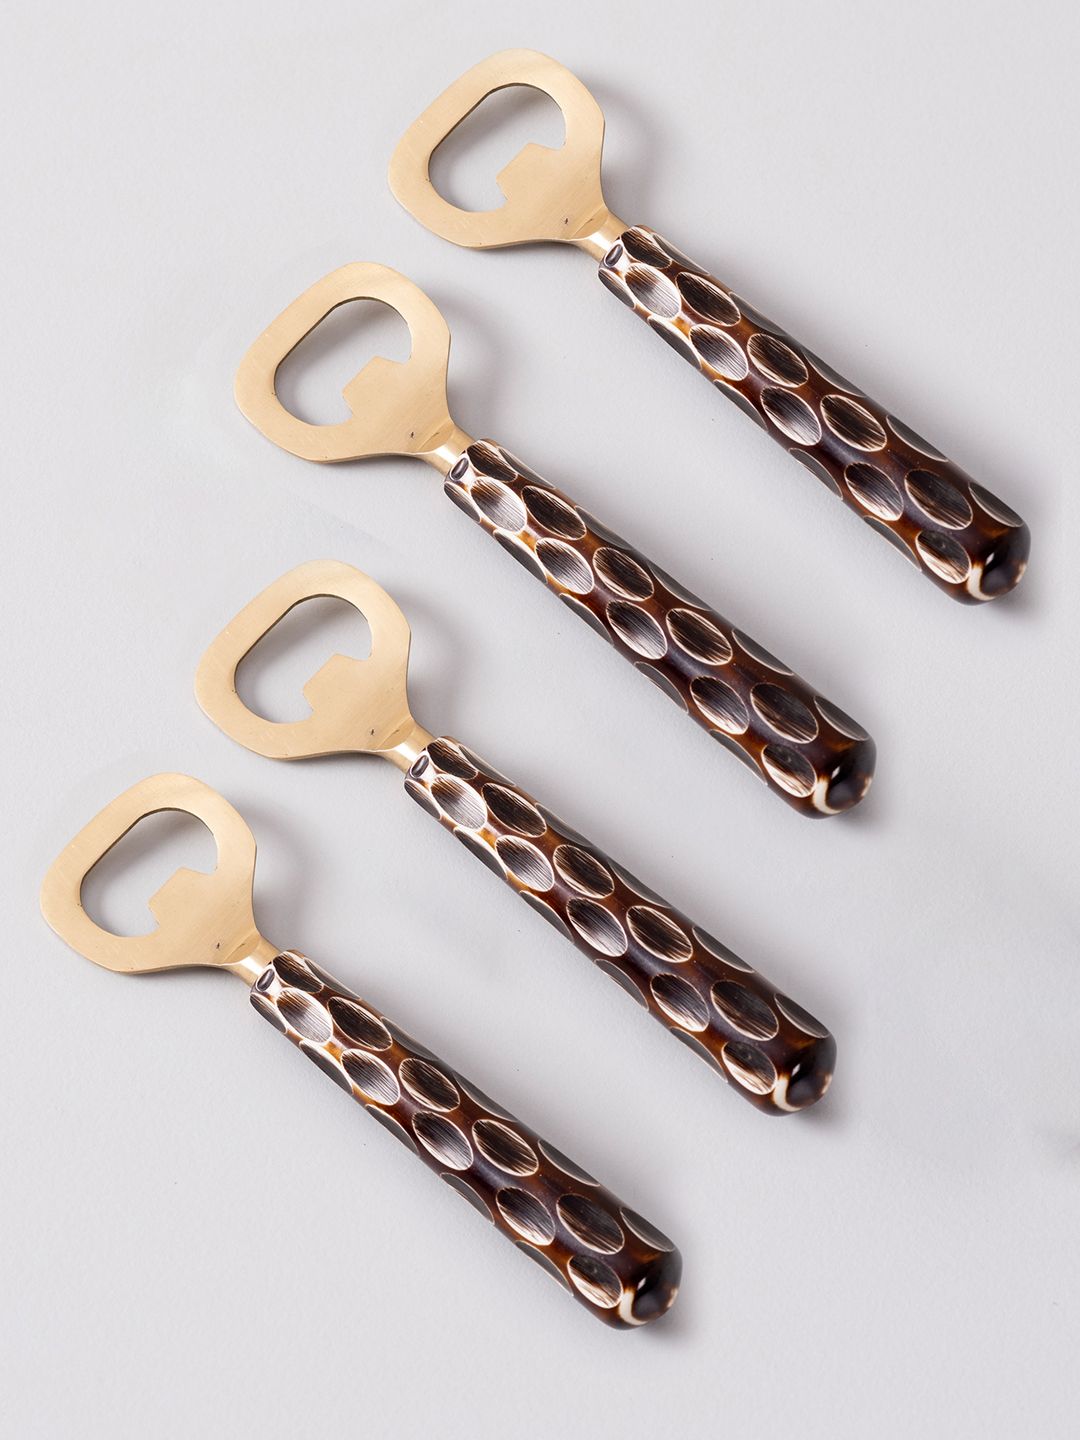 nestroots Set Of 4 Brown & Gold-Toned Wooden Bottle Opener Price in India